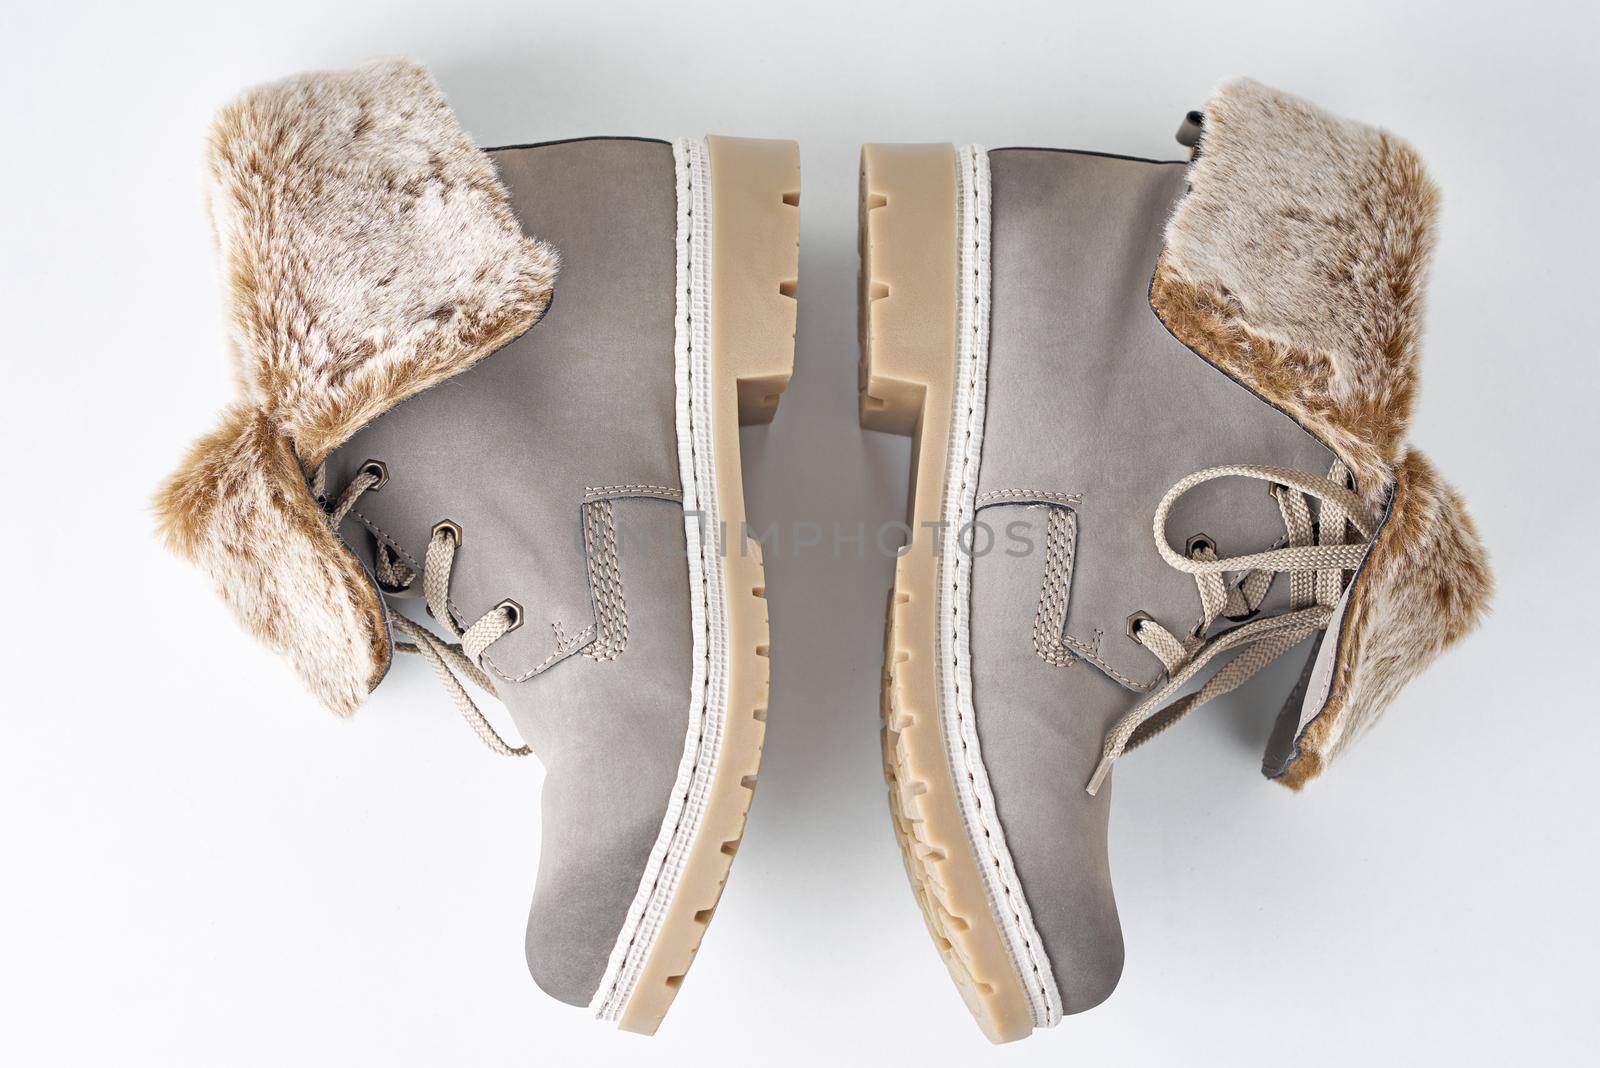 Pair of winter womens boots on white background isolated, top view